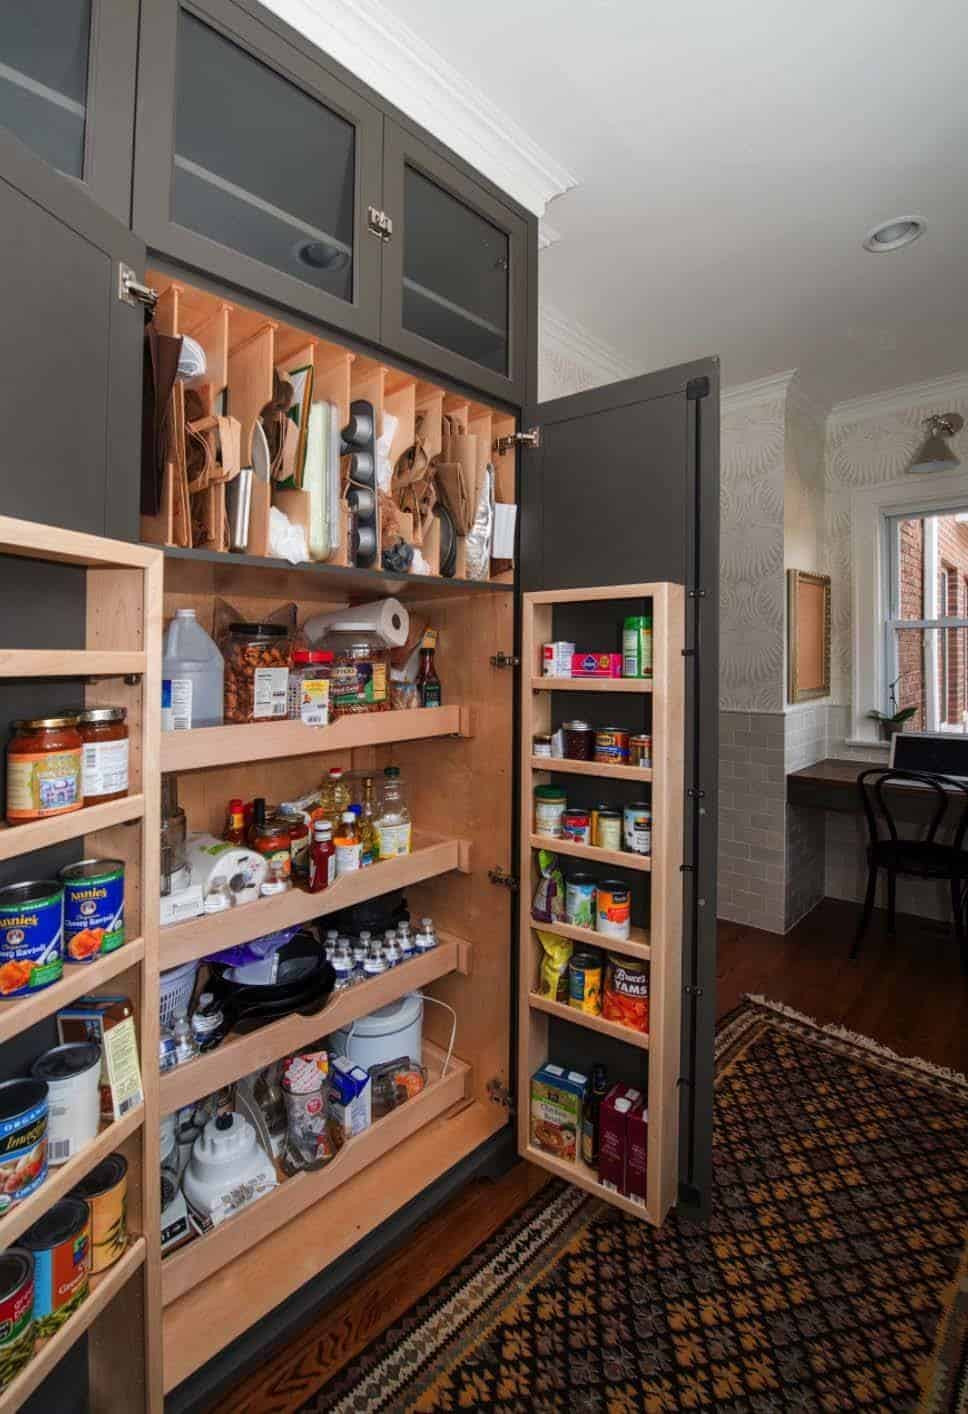 Kitchen Pantry Organizing Ideas
 35 Clever ideas to help organize your kitchen pantry